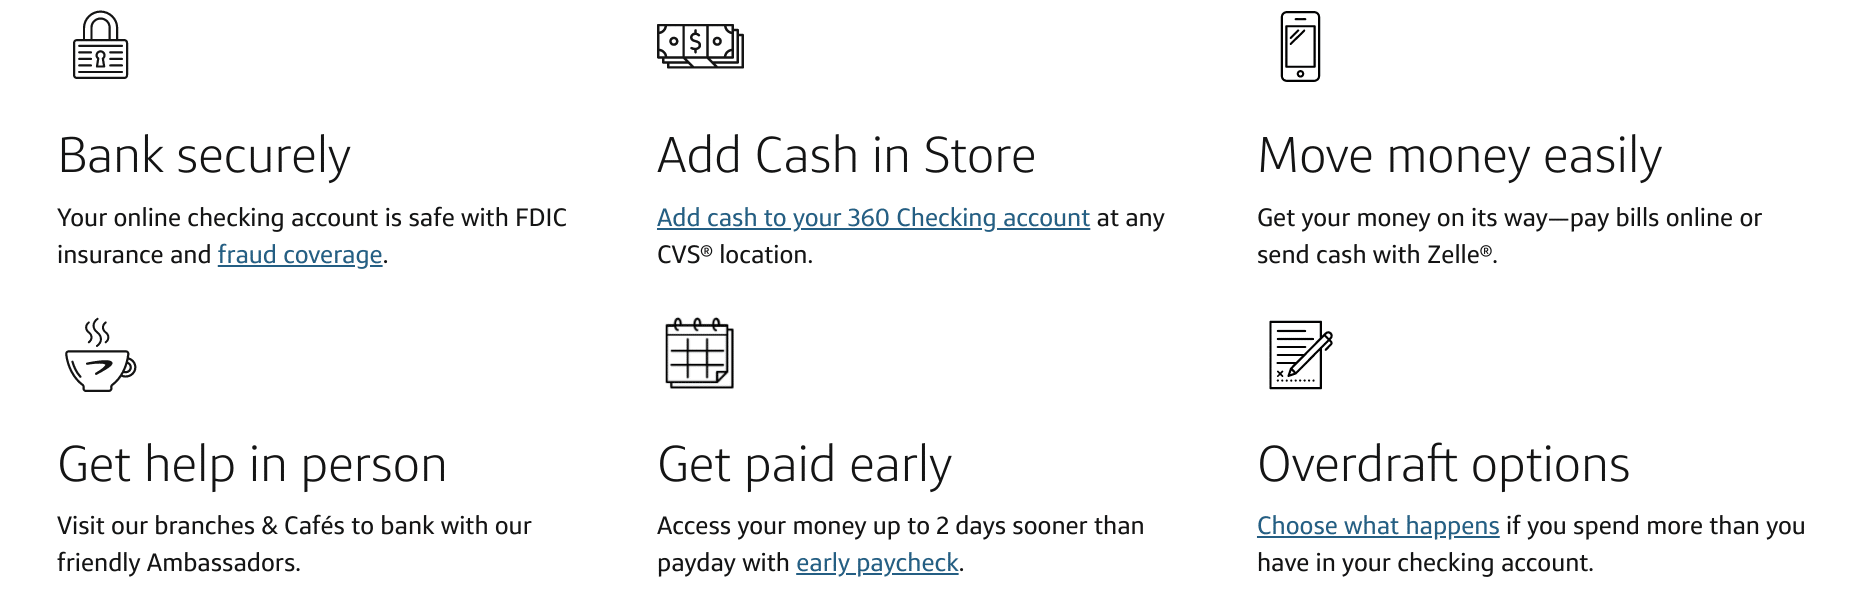 Capital One 360 Checking Review: 360 Checking Features